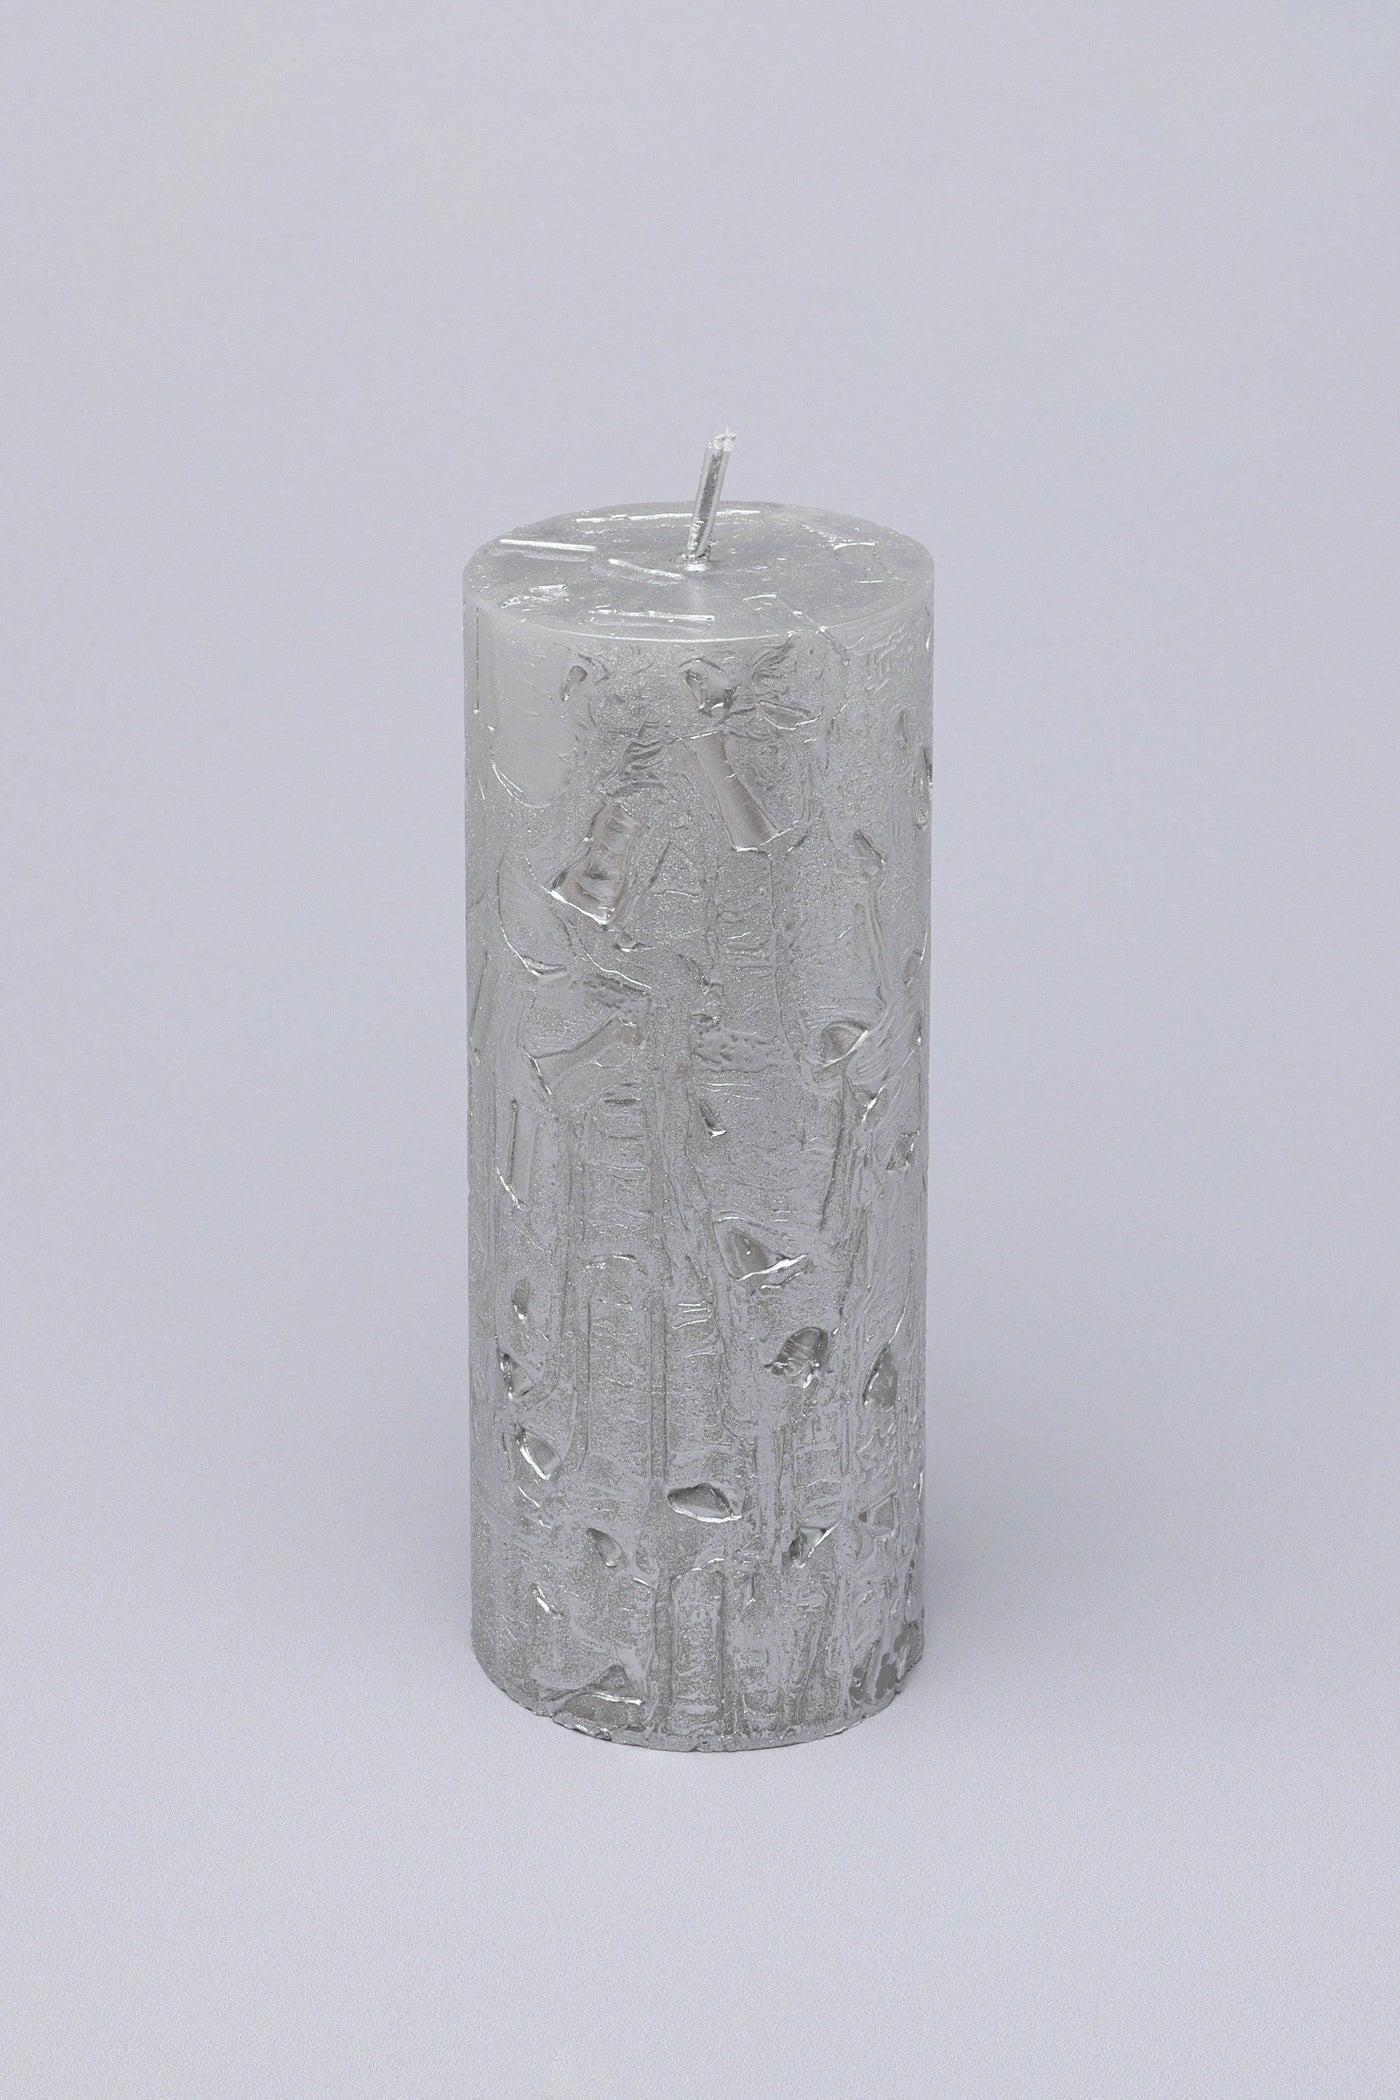 G Decor Candles Silver / Large Adeline Silver Metallic Textured Pillar Candle